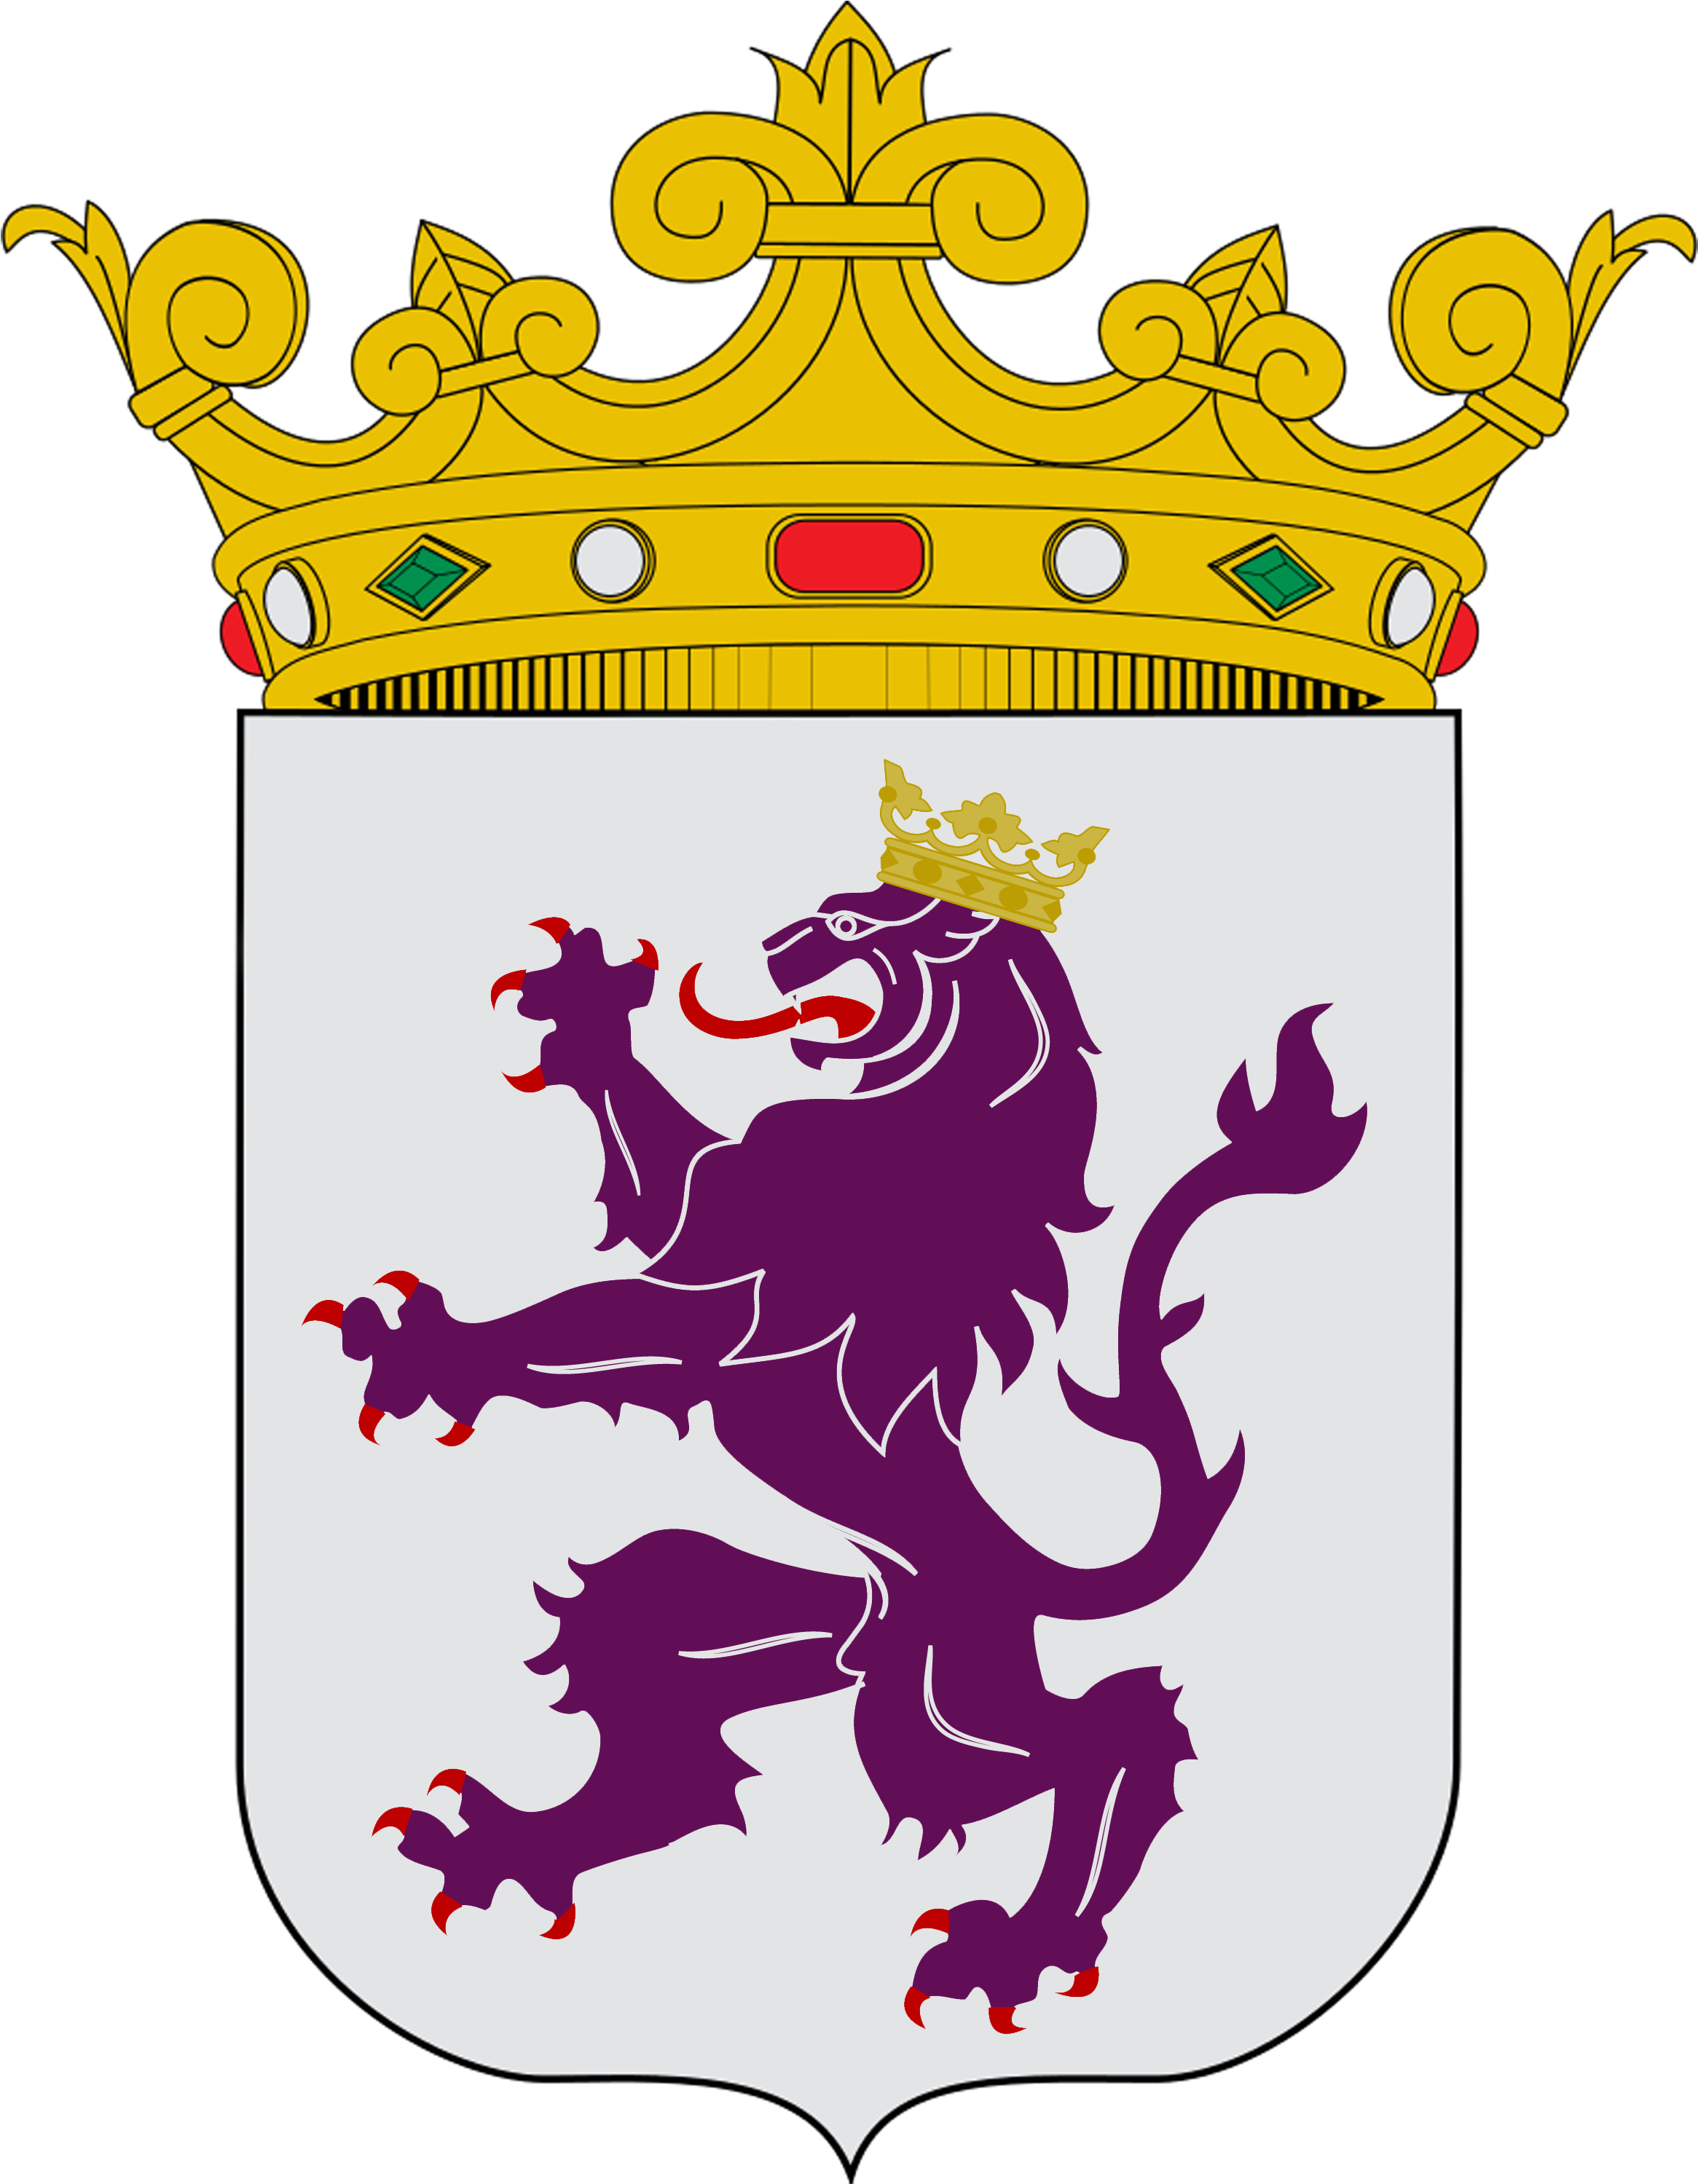 Coat Of Arms Of The Kingdom Of Le - Kingdom Of Leon Banner (2458x3126)